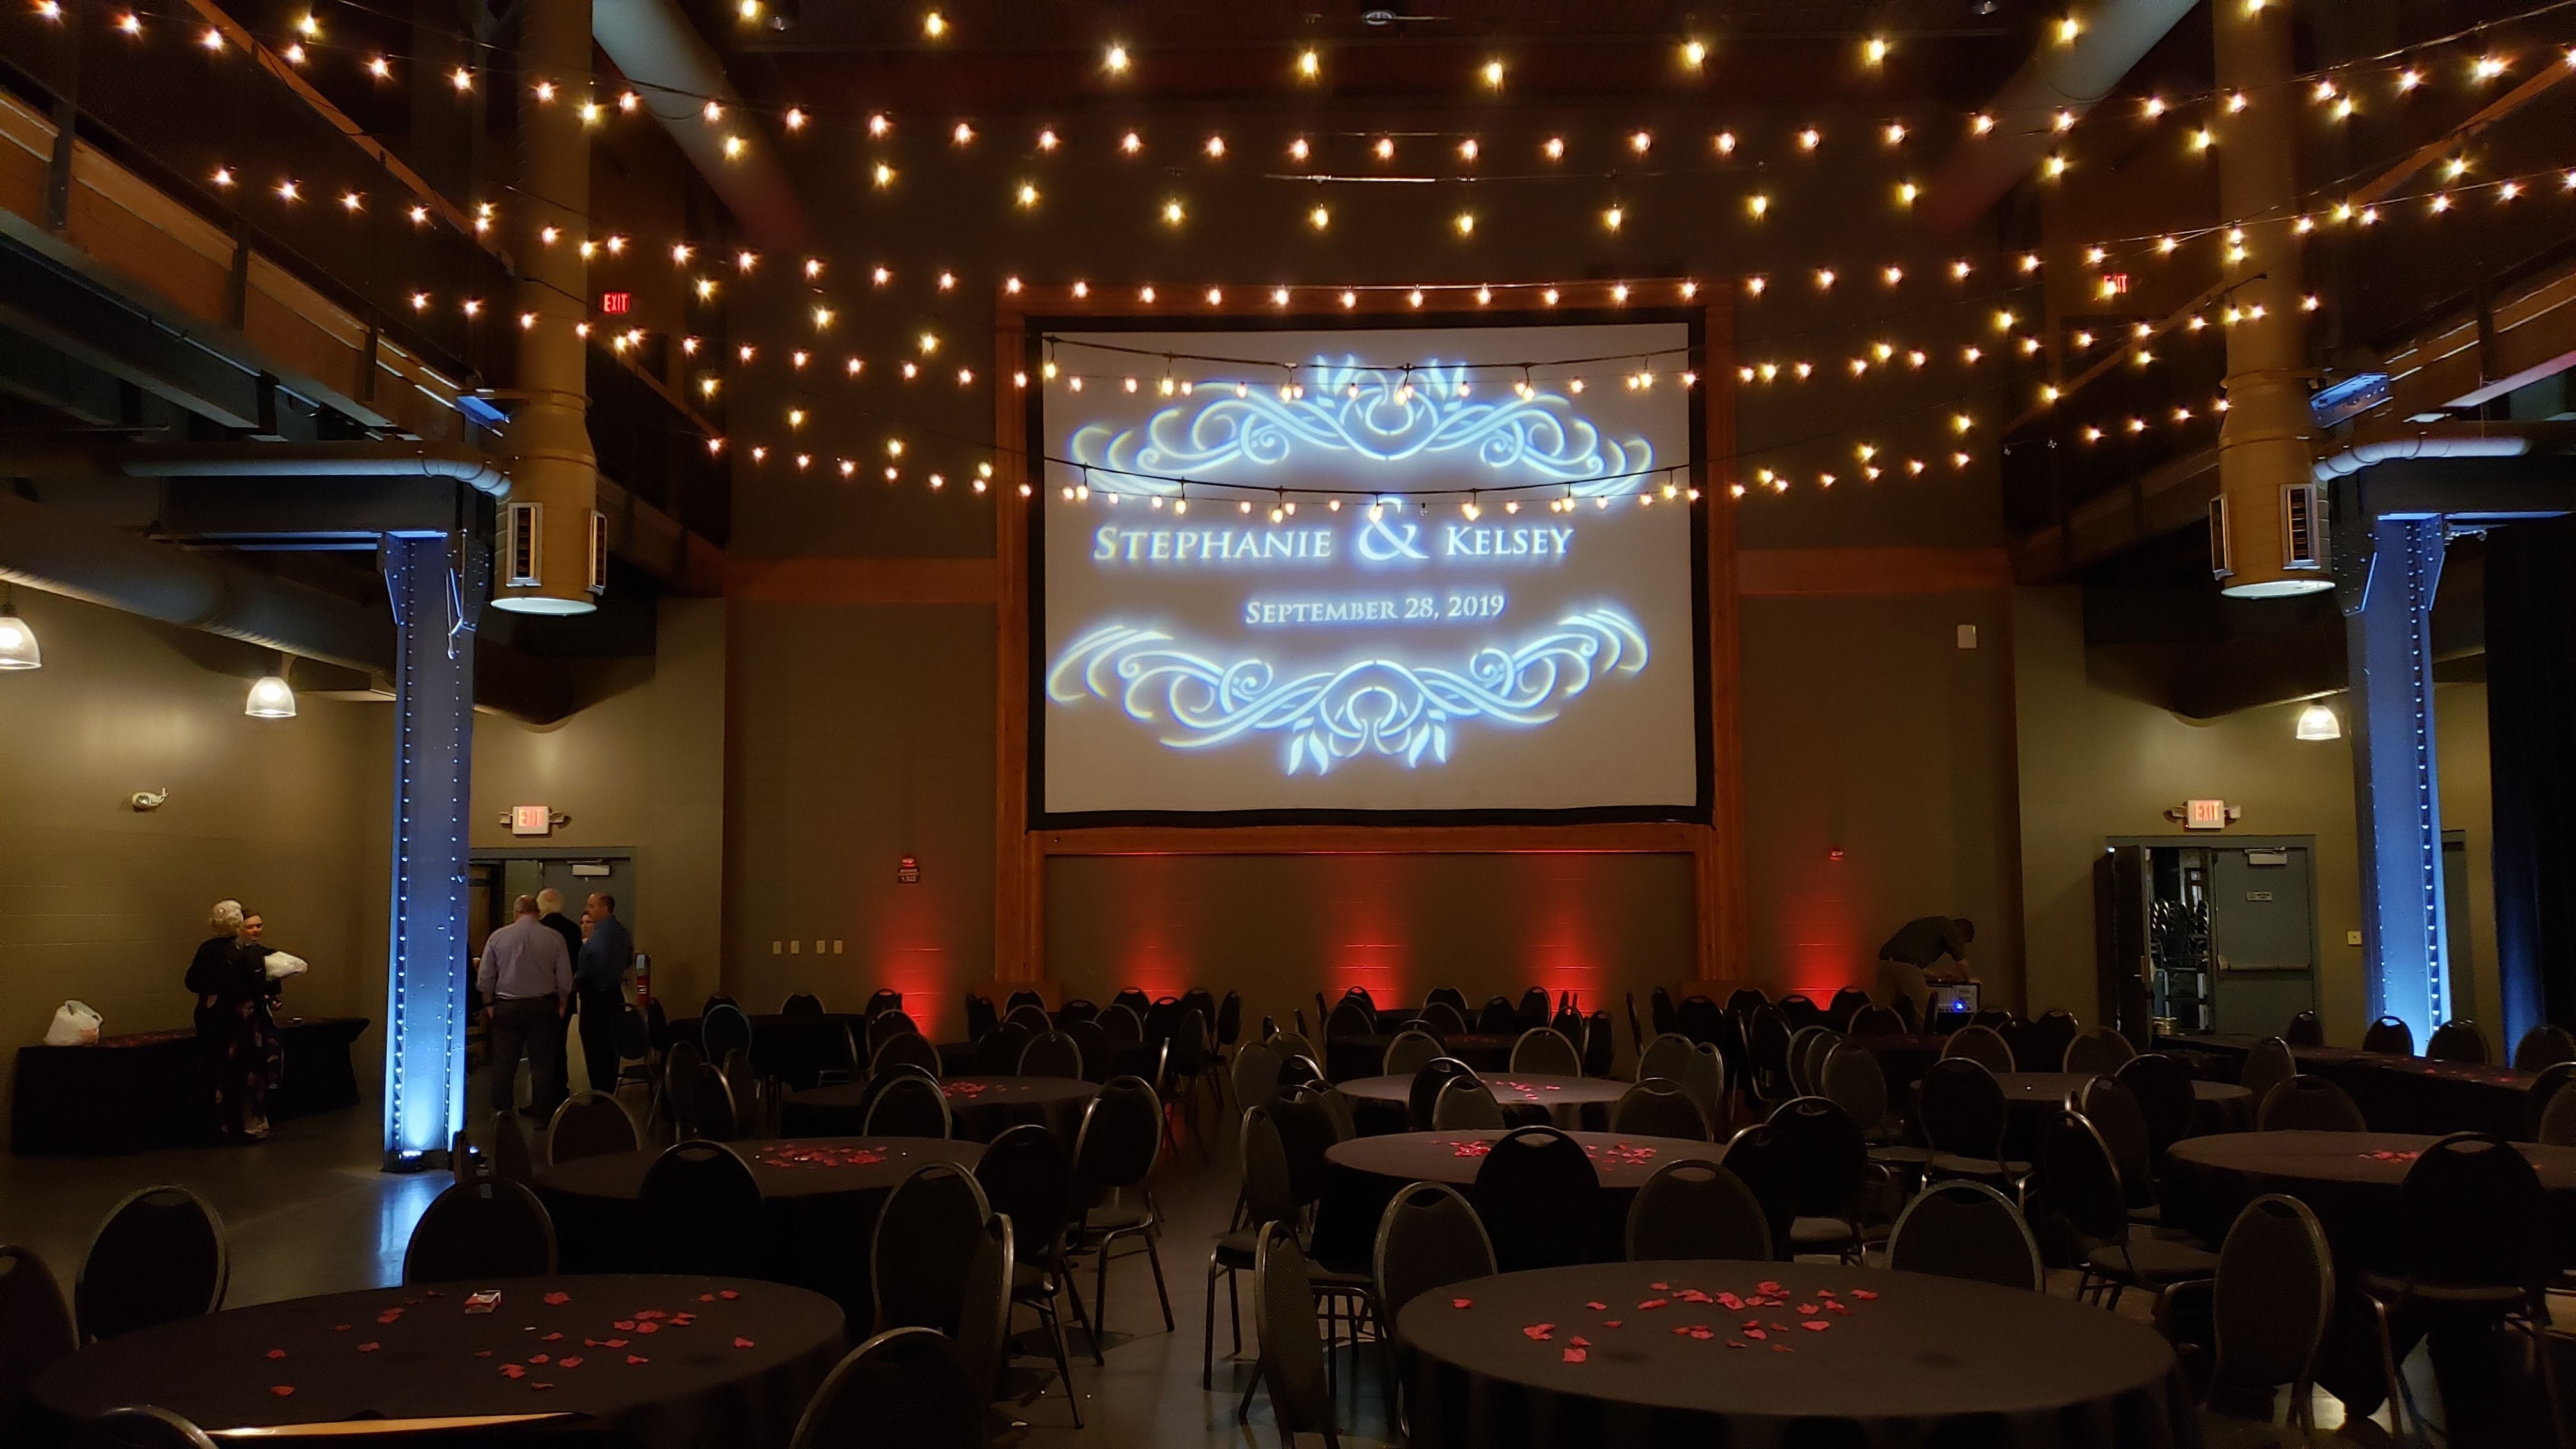 Wedding lighting in dim red at Clyde. Wedding monogram on the movie screen. Bistro